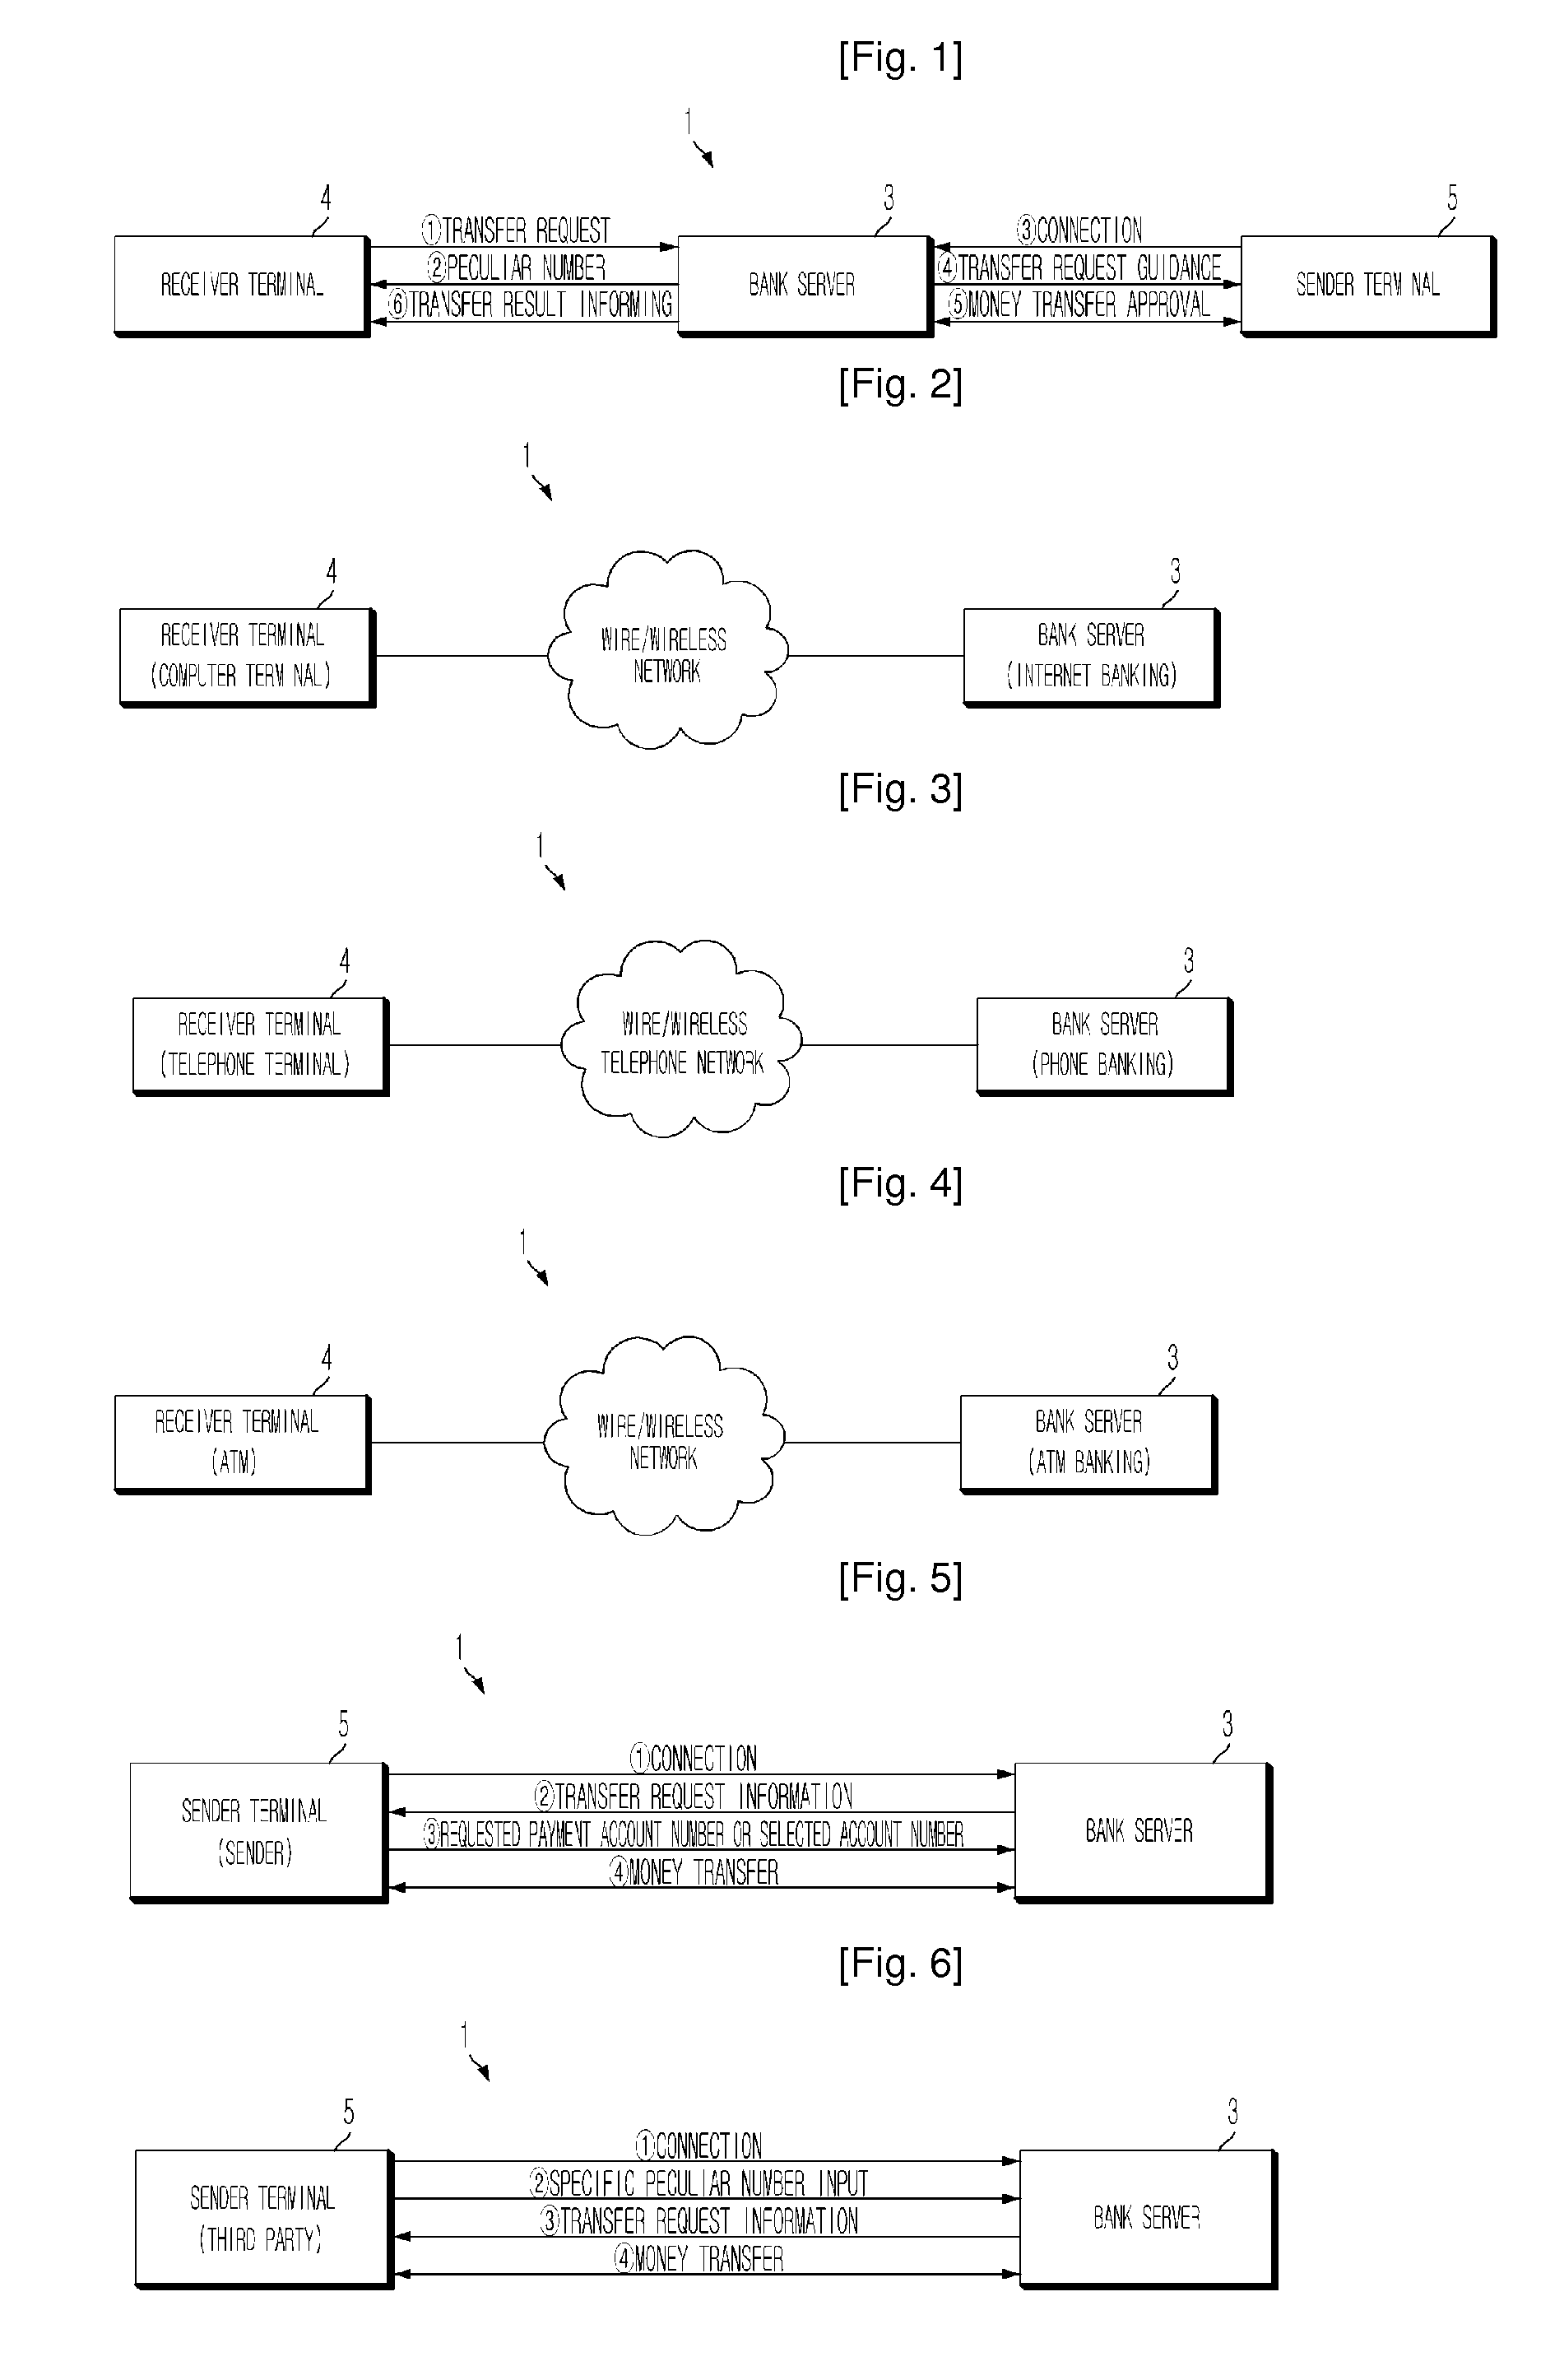 System And Method For Transferring Money Based On Approval Of Transfer Request Transmitted From Receiver To Sender